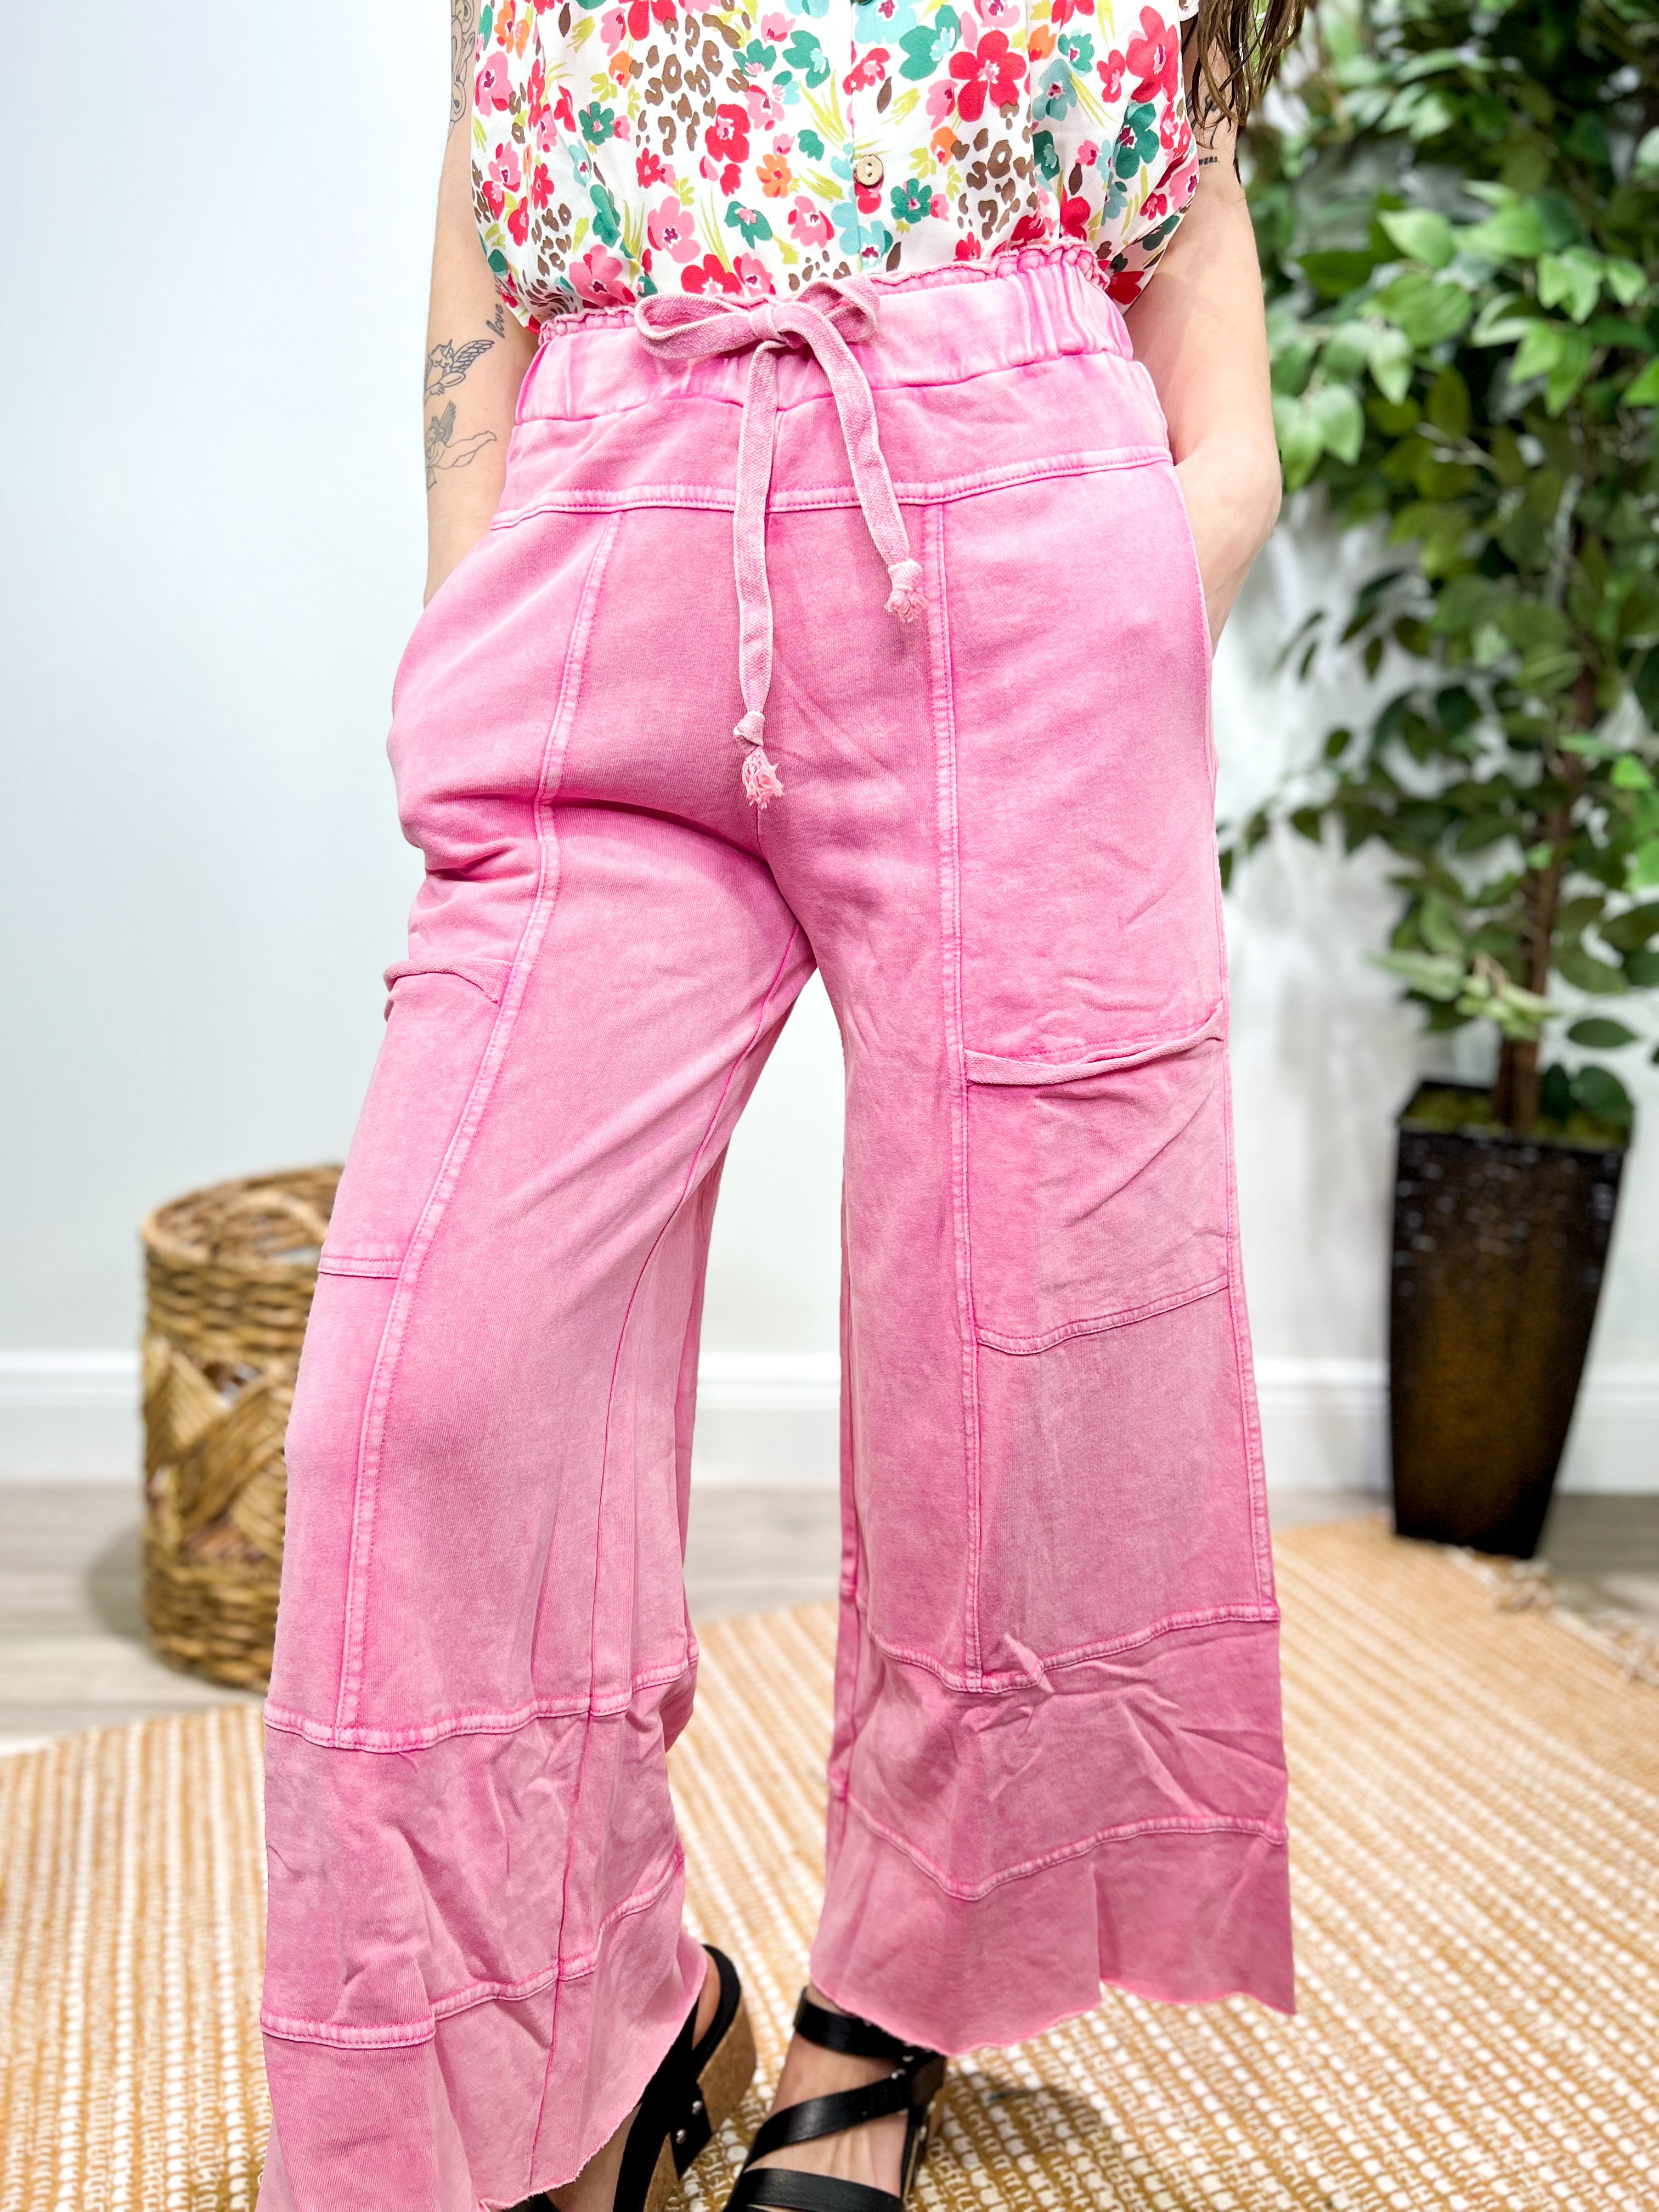 RESTOCK: On the Go Pants-150 PANTS-Easel-Heathered Boho Boutique, Women's Fashion and Accessories in Palmetto, FL